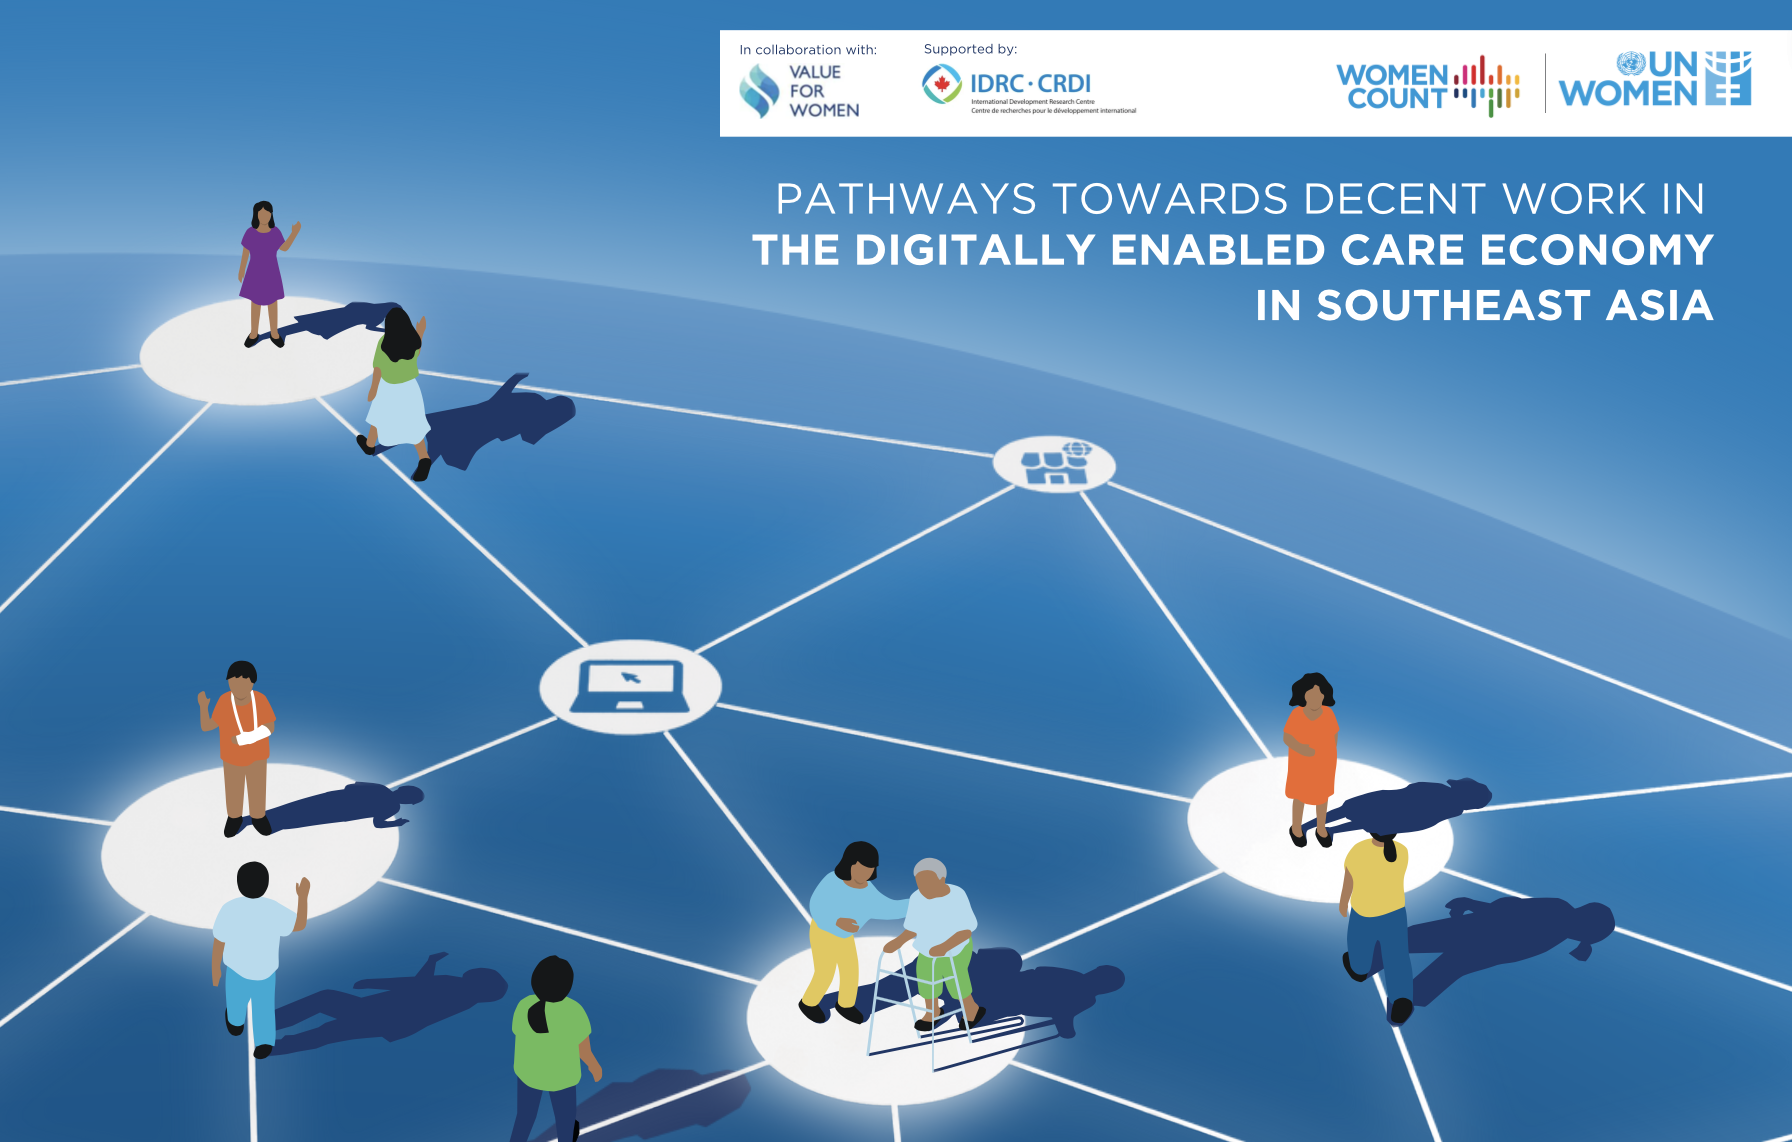 New research reveals that digitalization can set innovative pathways towards decent work in the digitally enabled care economy in South-East Asia 